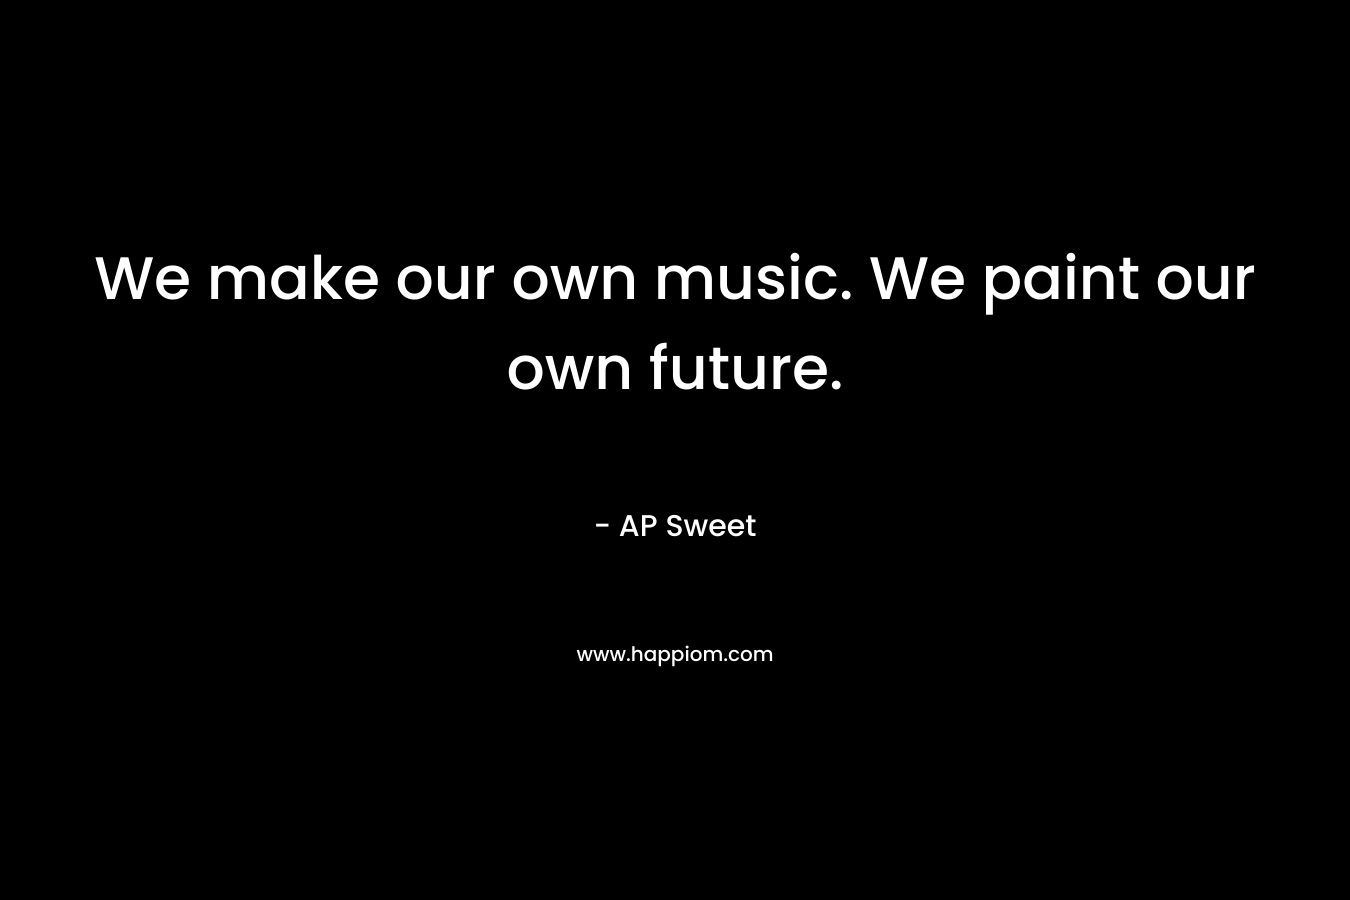 We make our own music. We paint our own future.